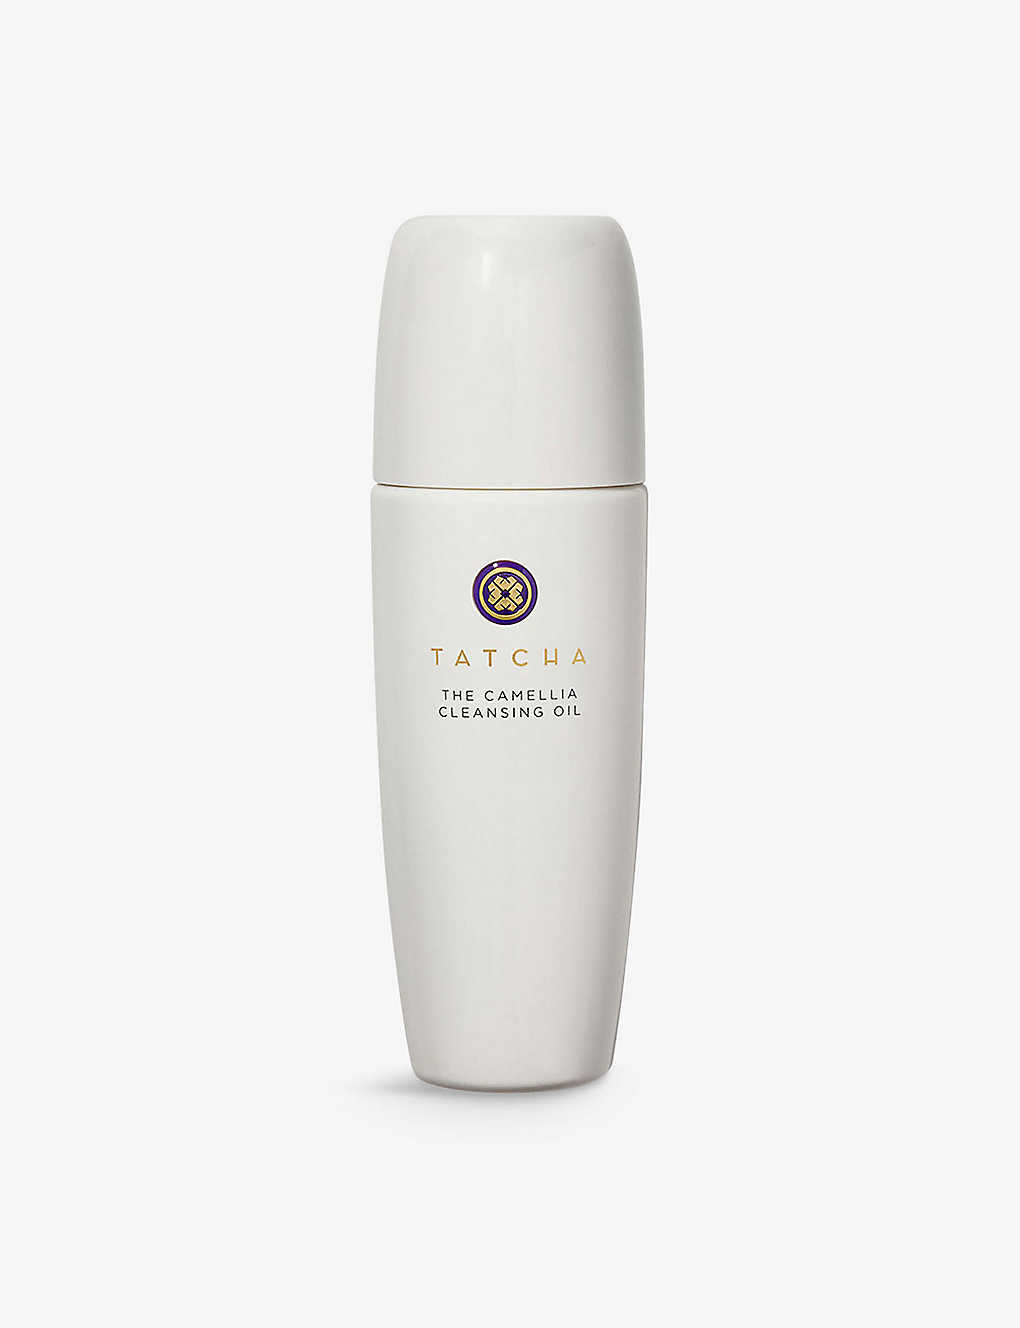 Tatcha The Camellia Cleansing Oil In White